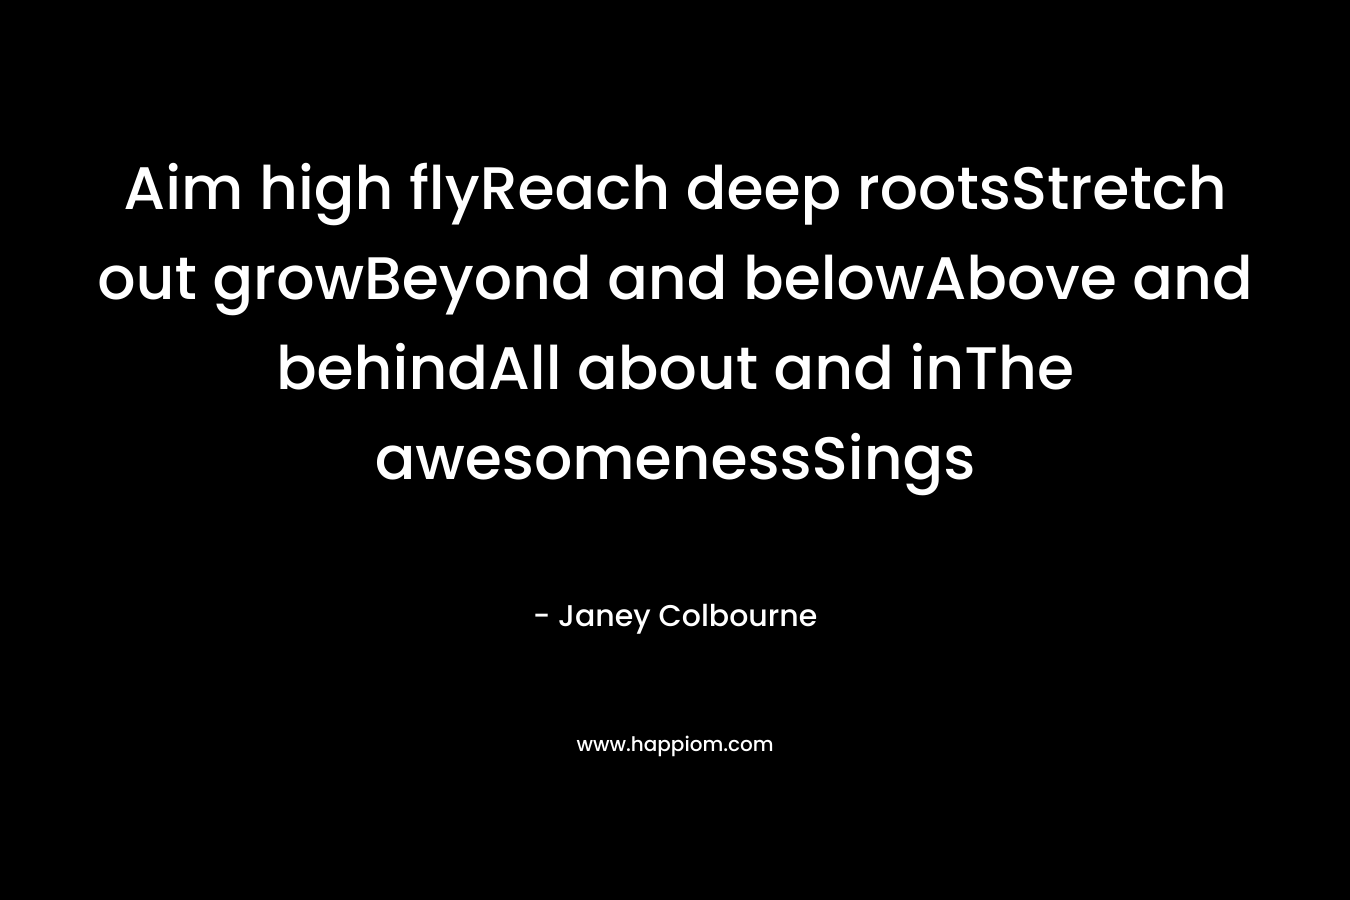 Aim high flyReach deep rootsStretch out growBeyond and belowAbove and behindAll about and inThe awesomenessSings – Janey Colbourne